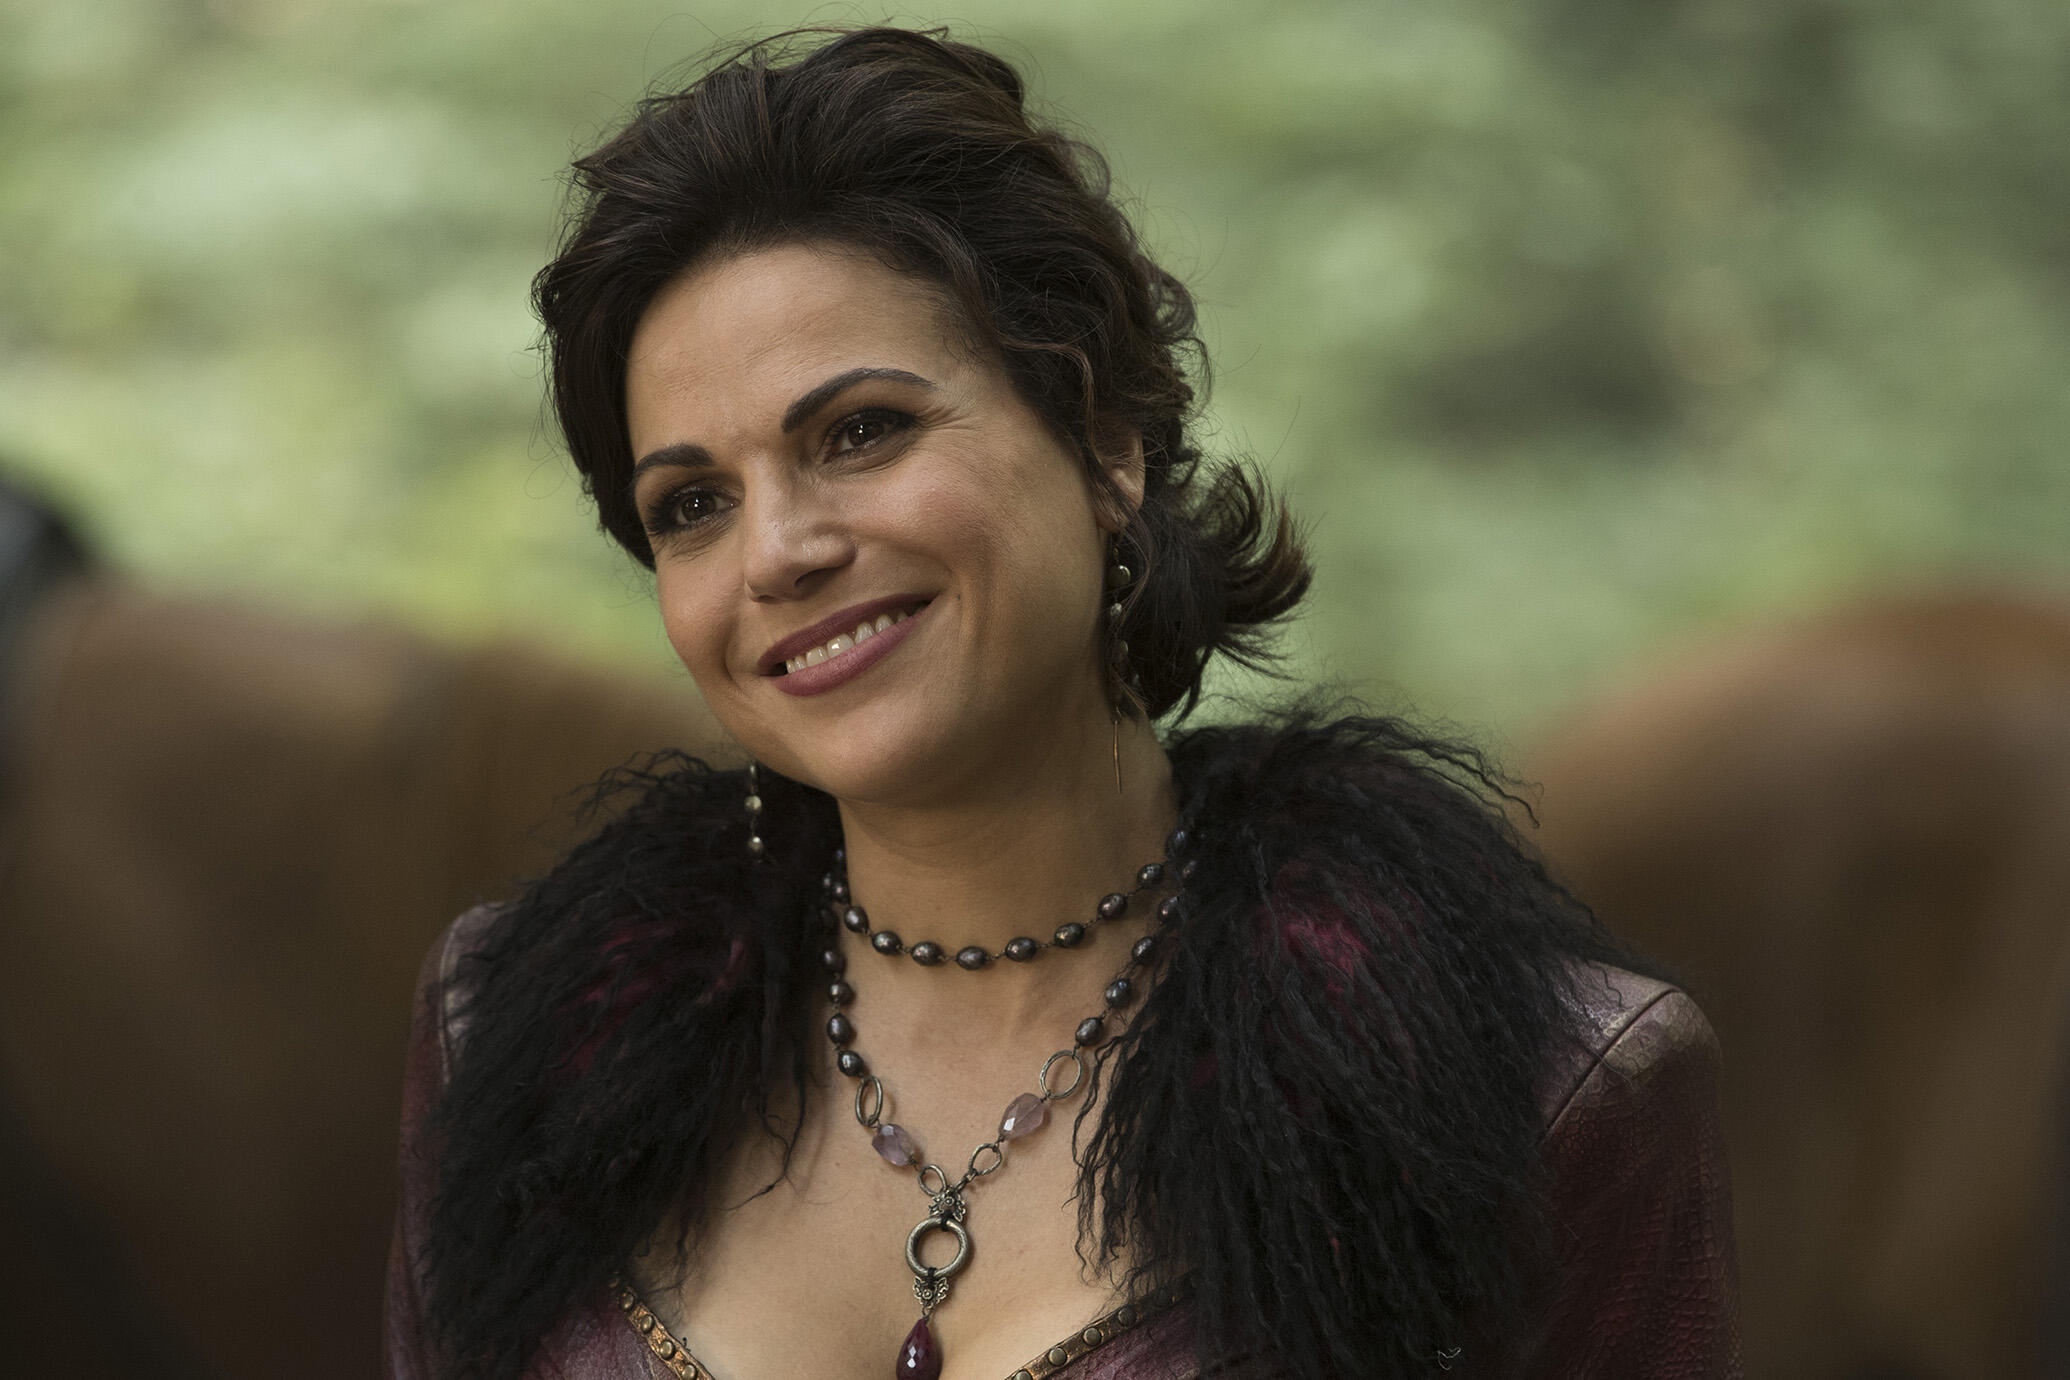 Once upon a time 2x07 streaming sub ita torrent bittorrent download free xp windows